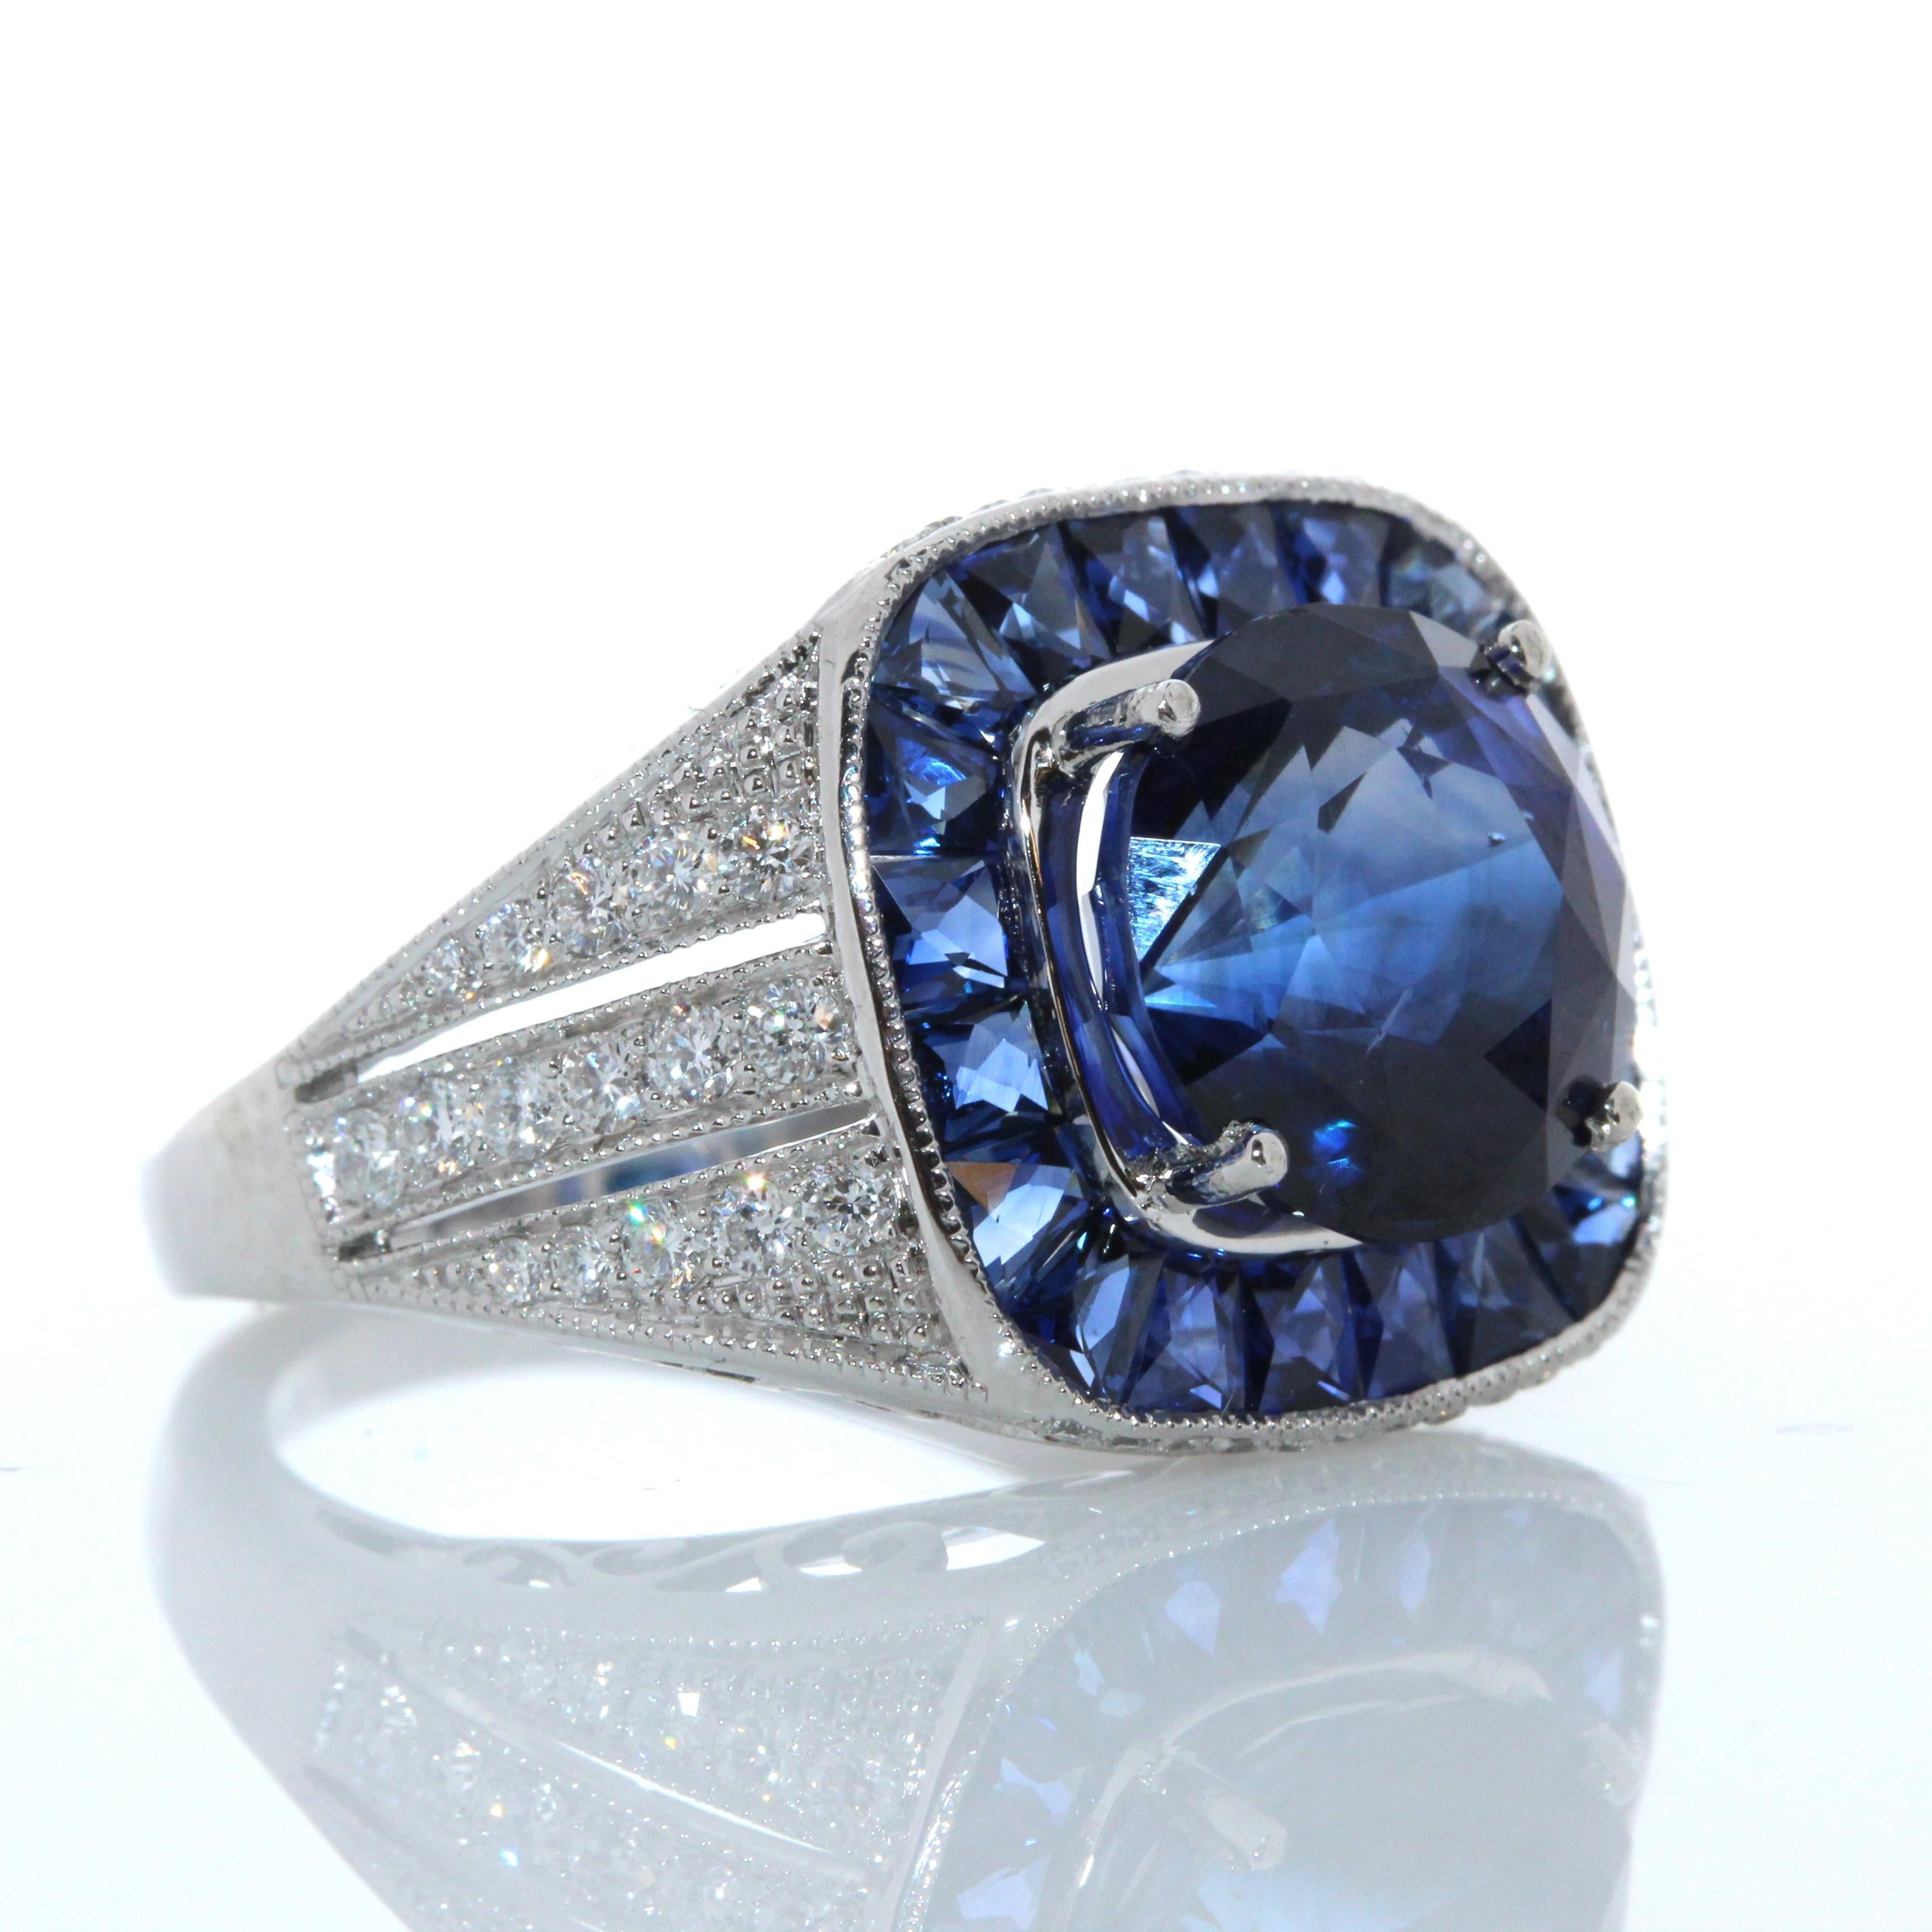 This is a 5.35 carats royal blue sapphire that is surrounded by a stunning halo of round brilliant diamonds. This spectacular Platinum custom made ring truly displays the incredible beauty of the round shaped Blue Sapphire. The 0.46 carat total